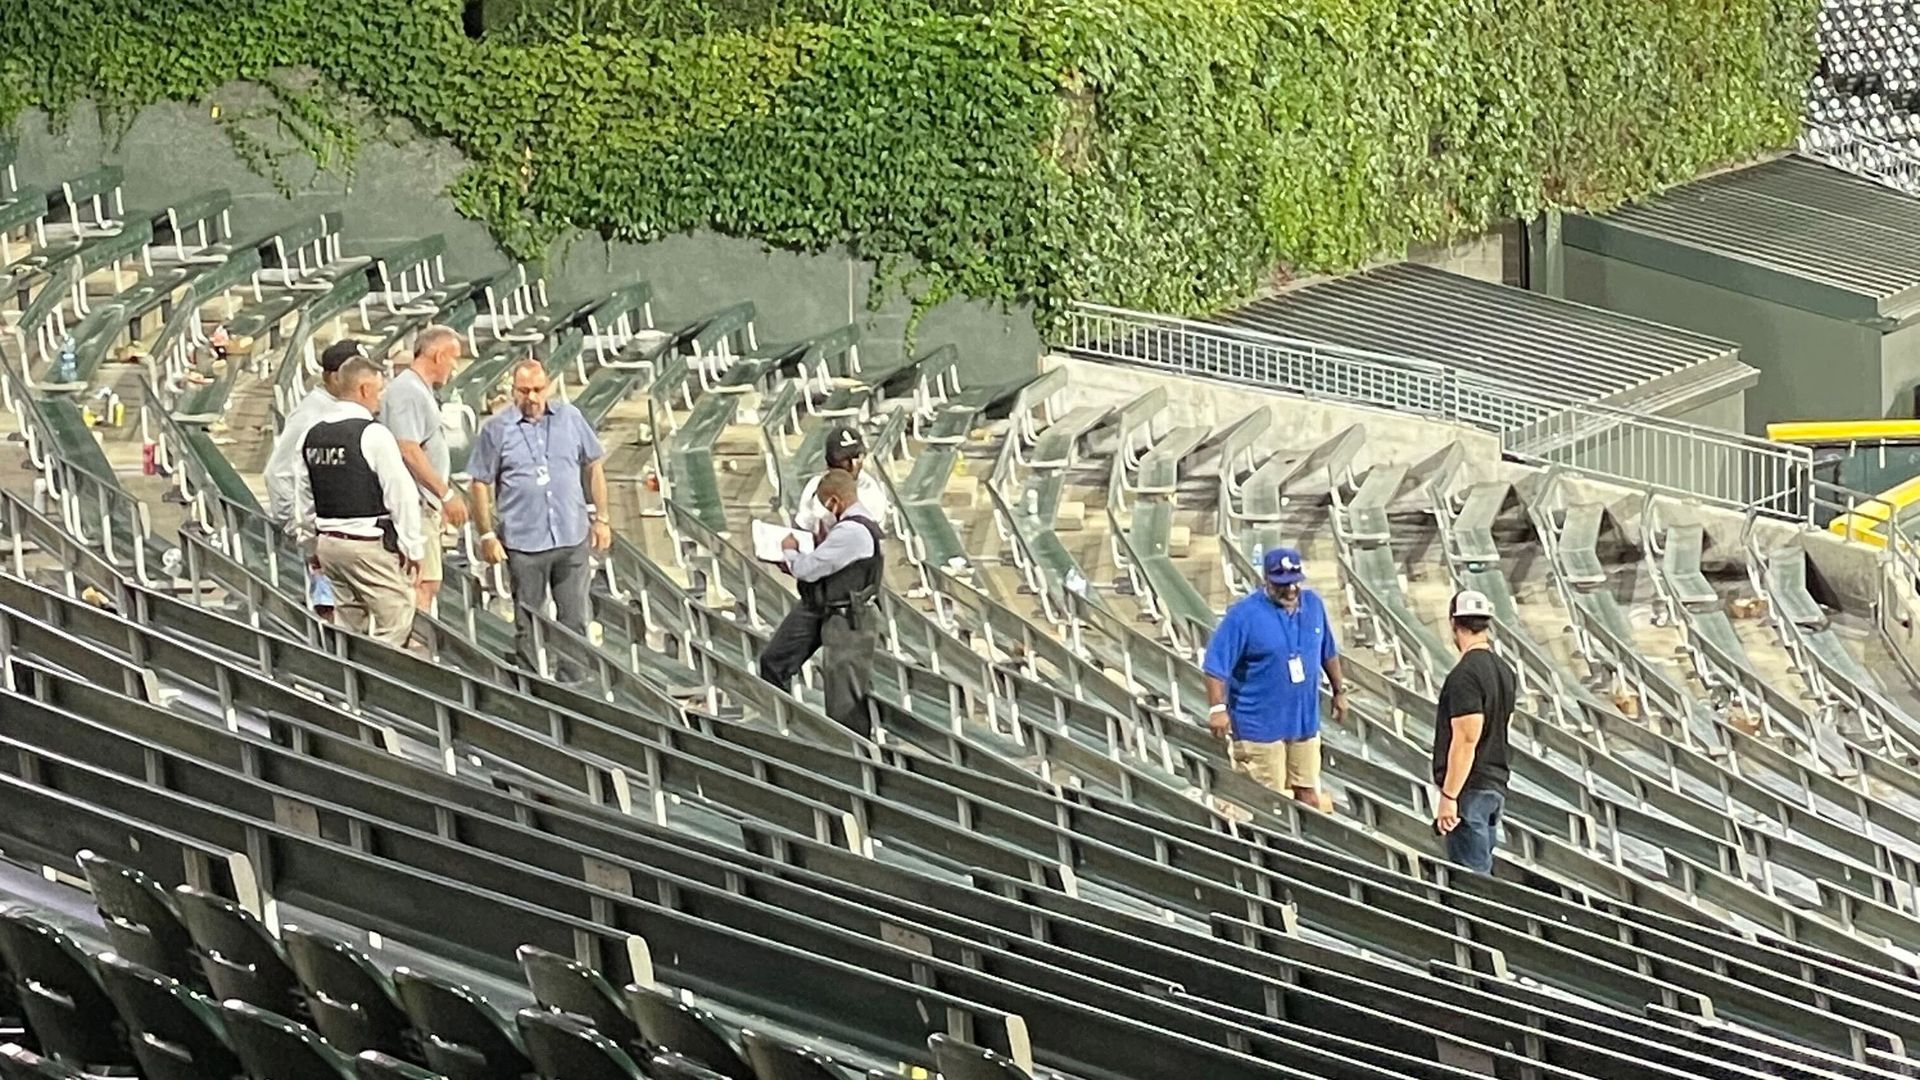 Photo of people looking at stadium bleachers after a baseball game 